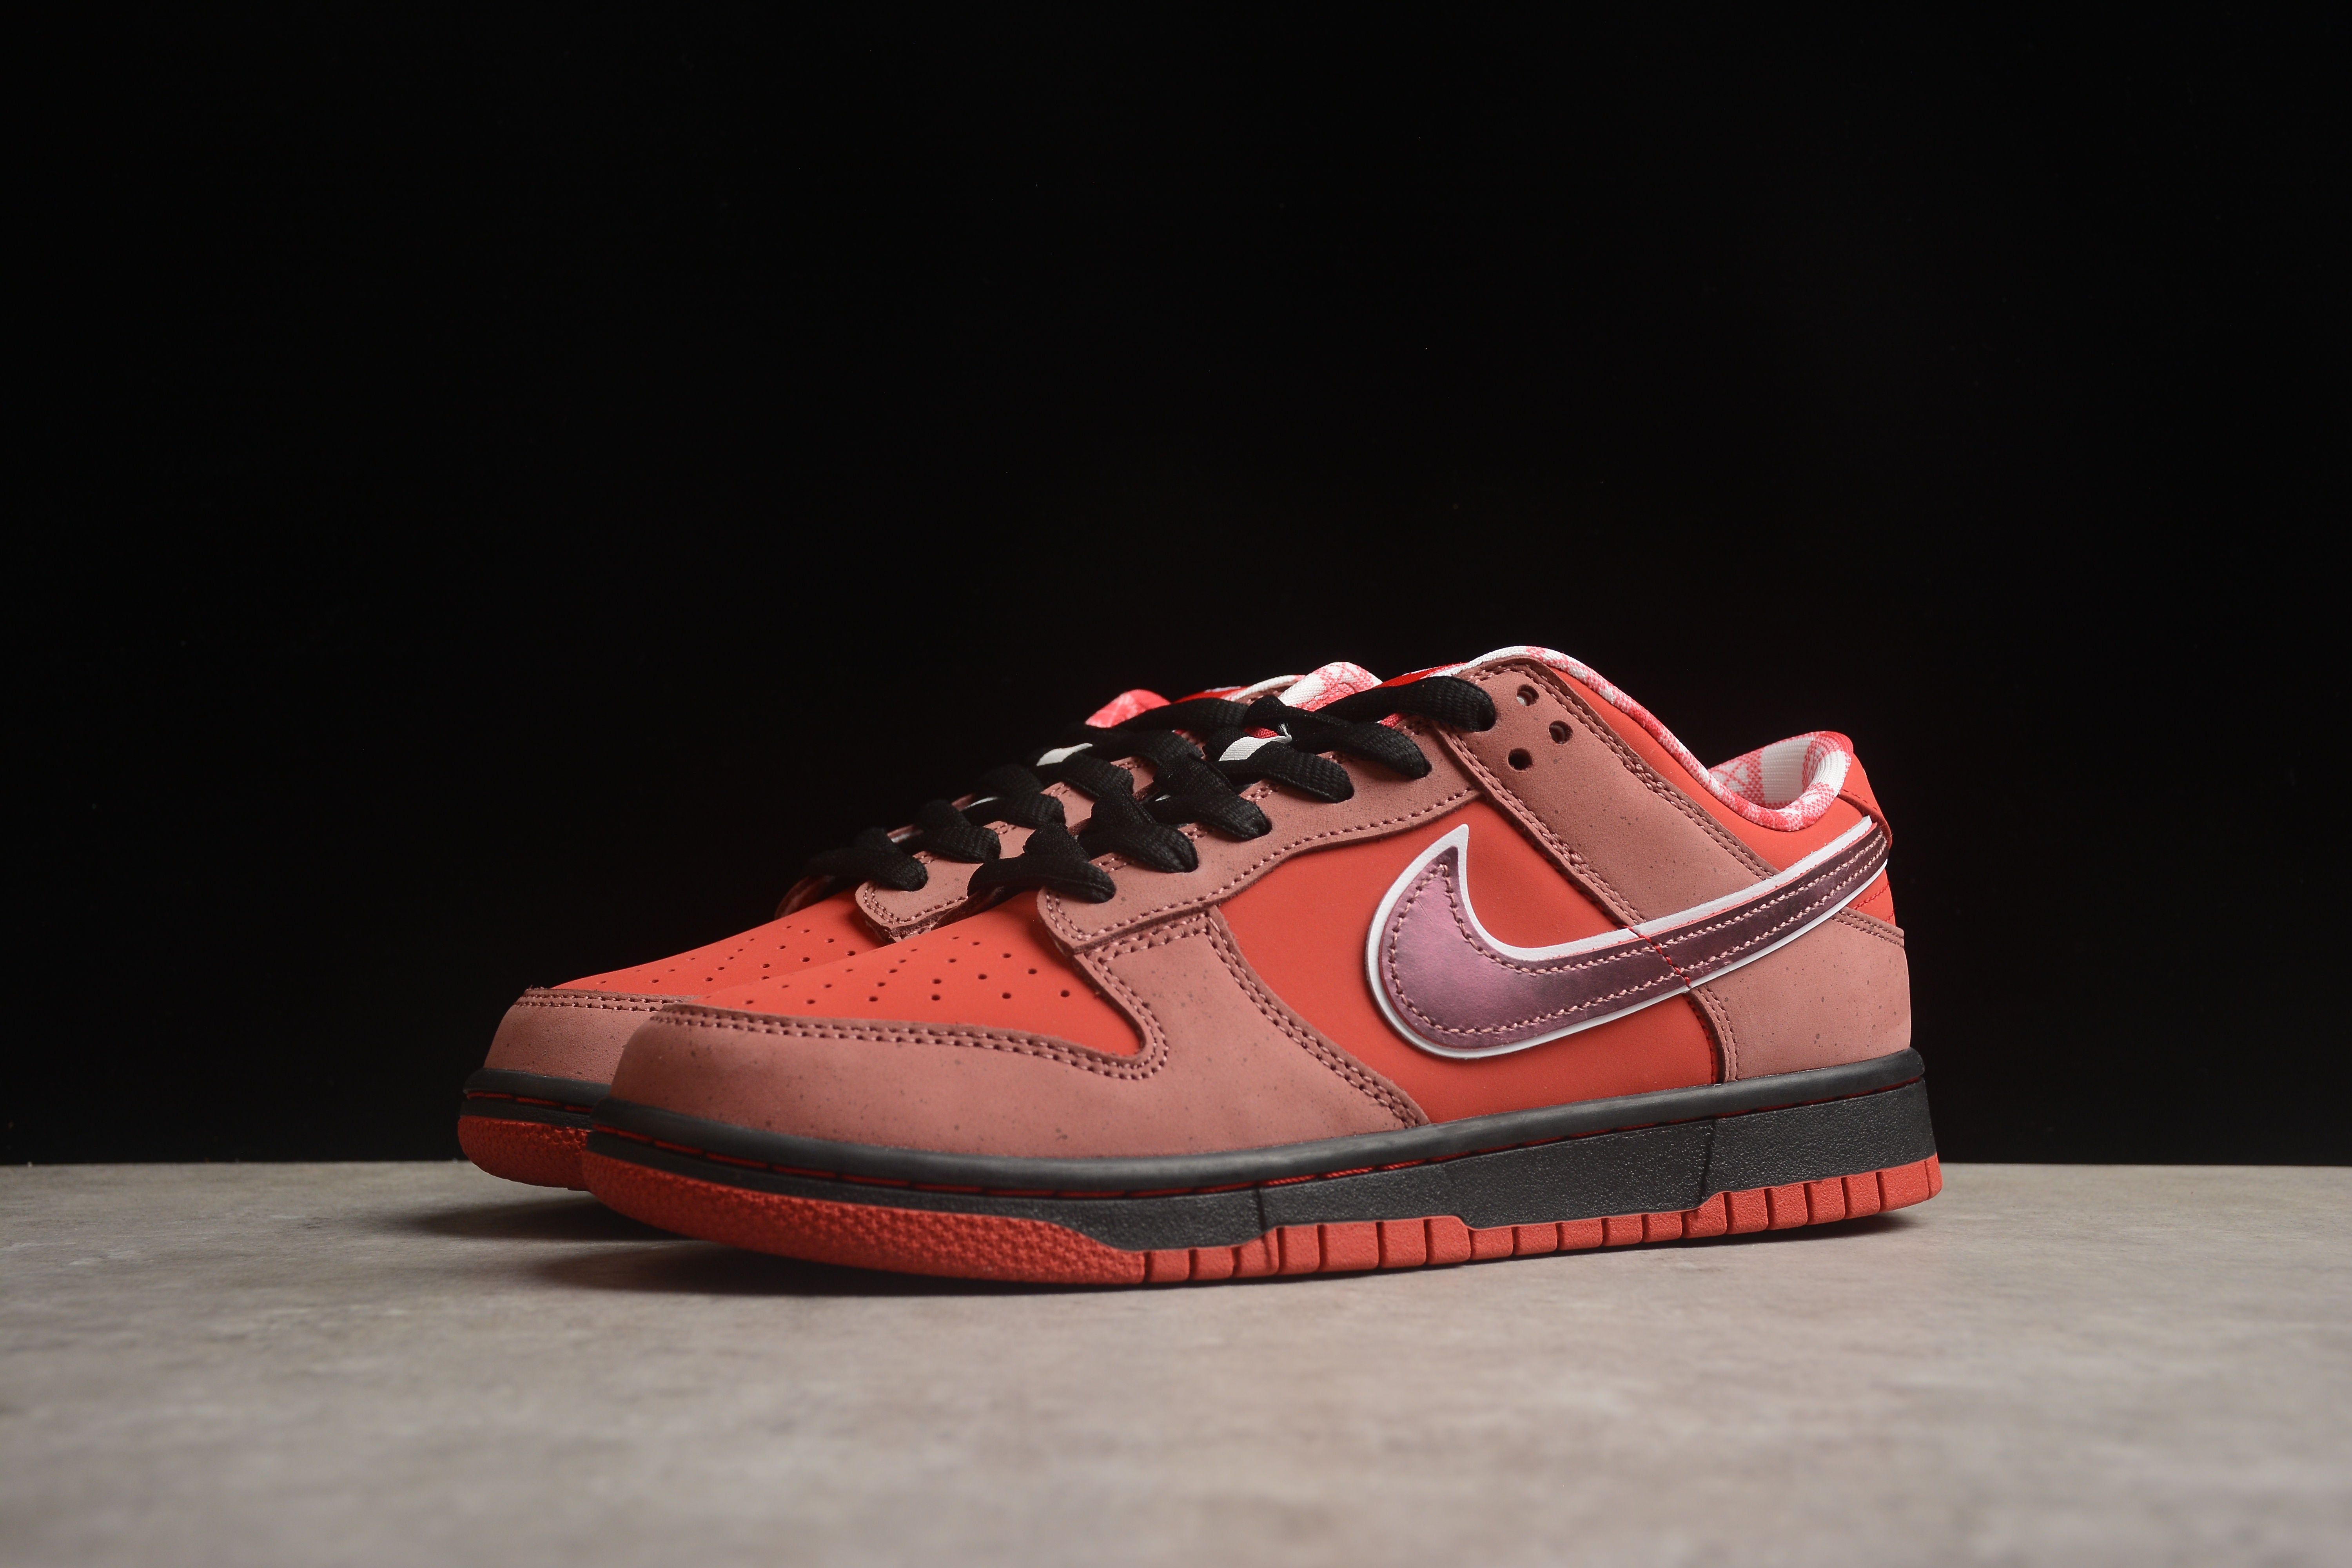 Nike SB dunk low red lobster shoes